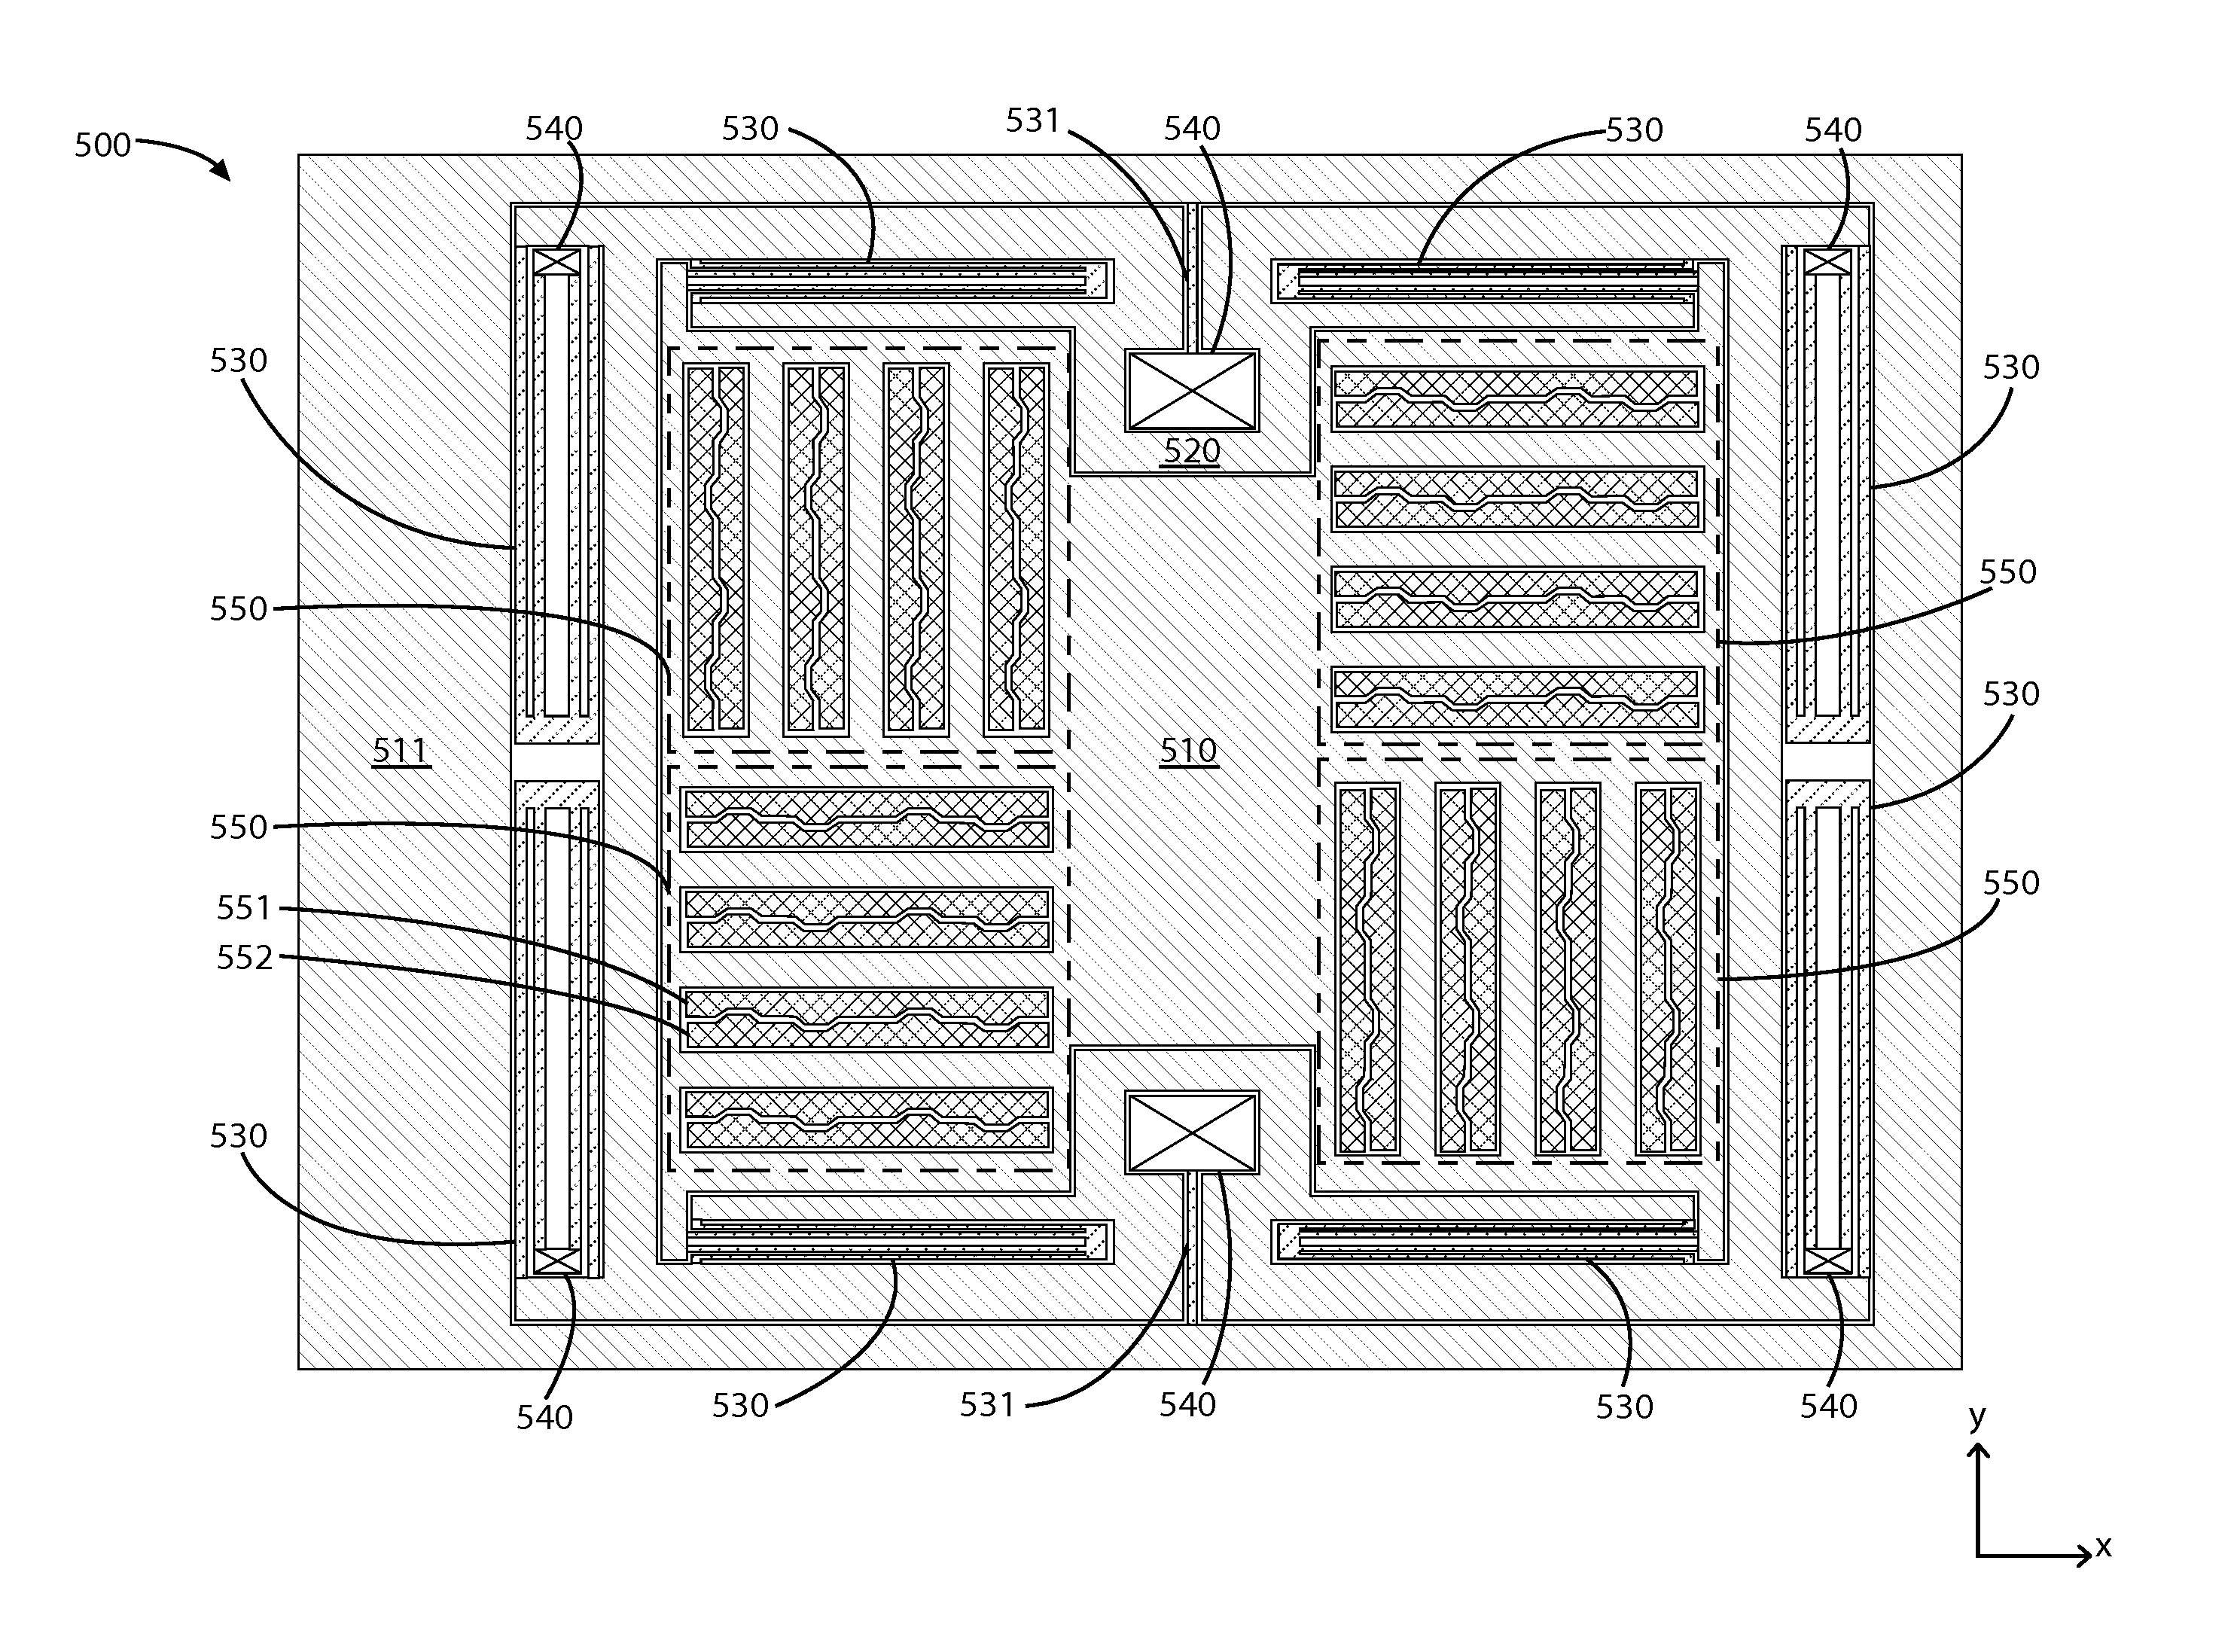 MEMS-based dual and single proof-mass accelerometer methods and apparatus